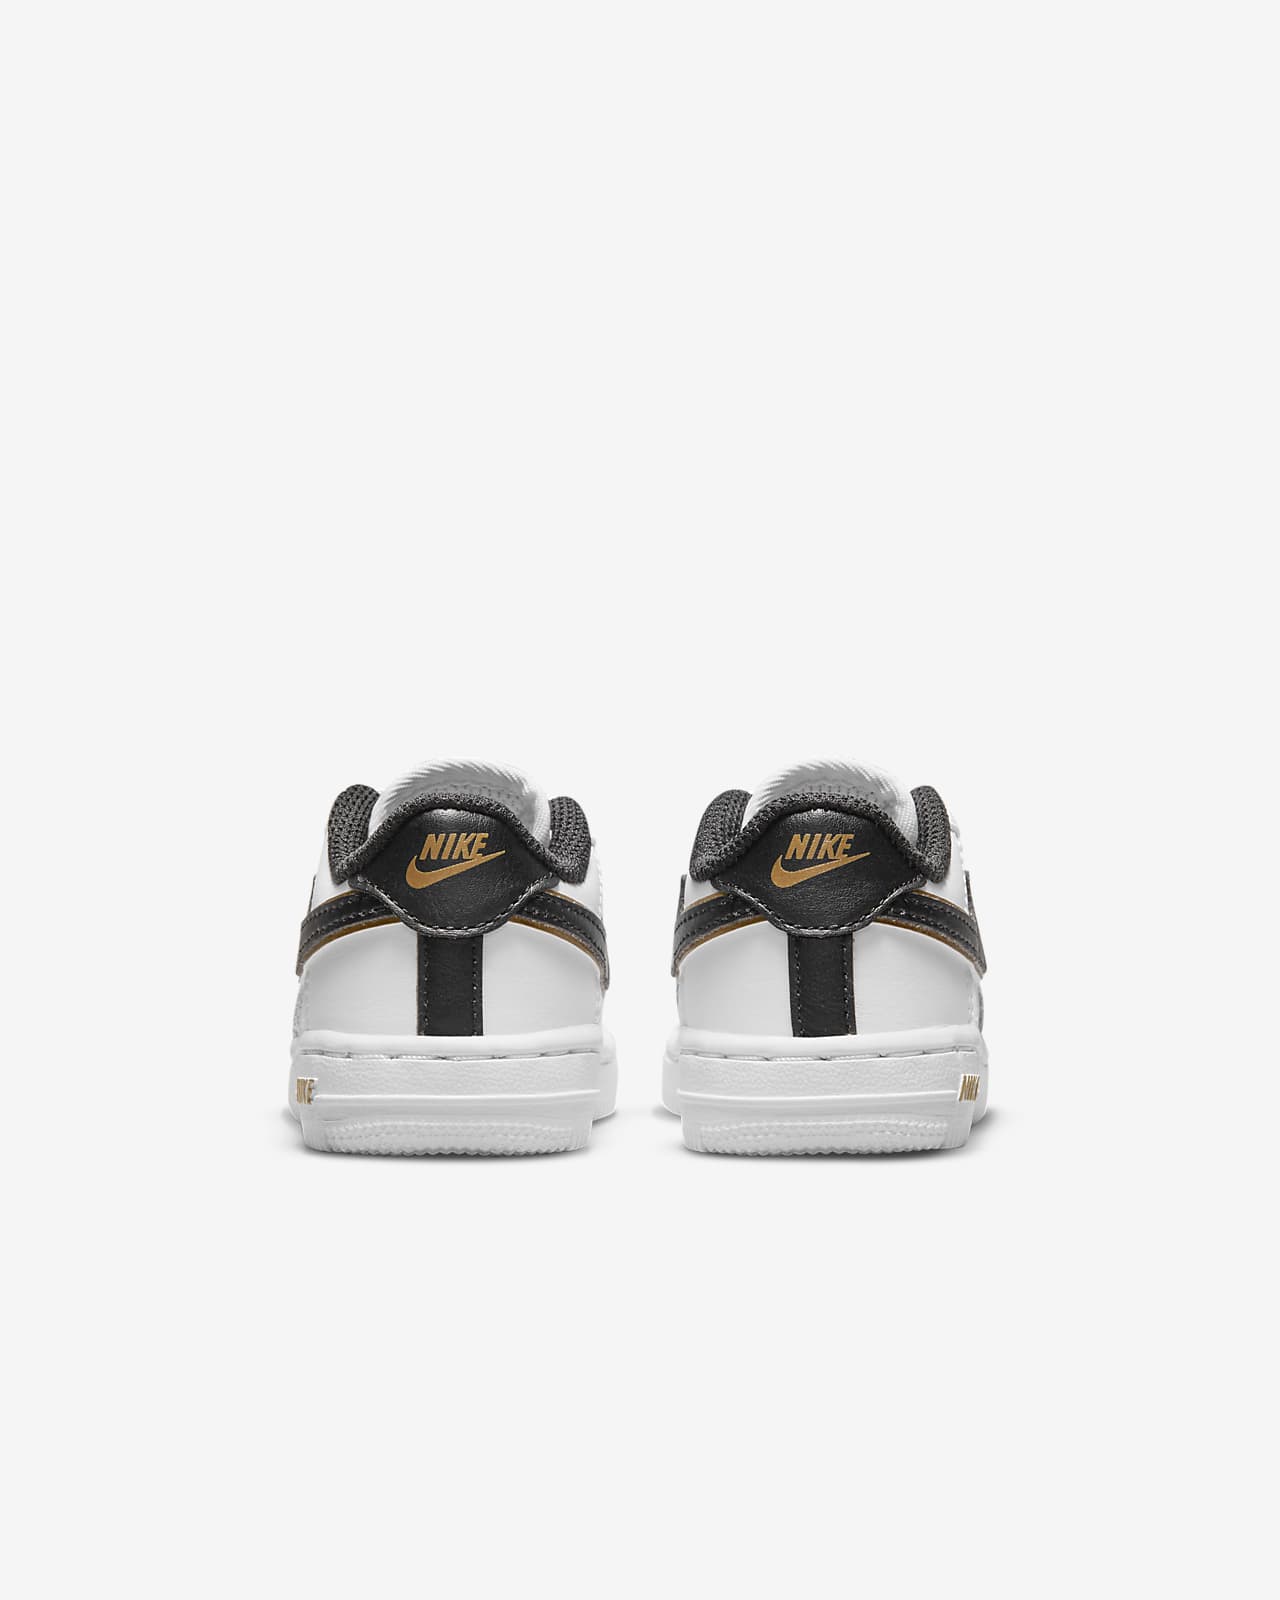 Nike Toddler Force 1 LV8 in White | Size 10C | DM3387-100